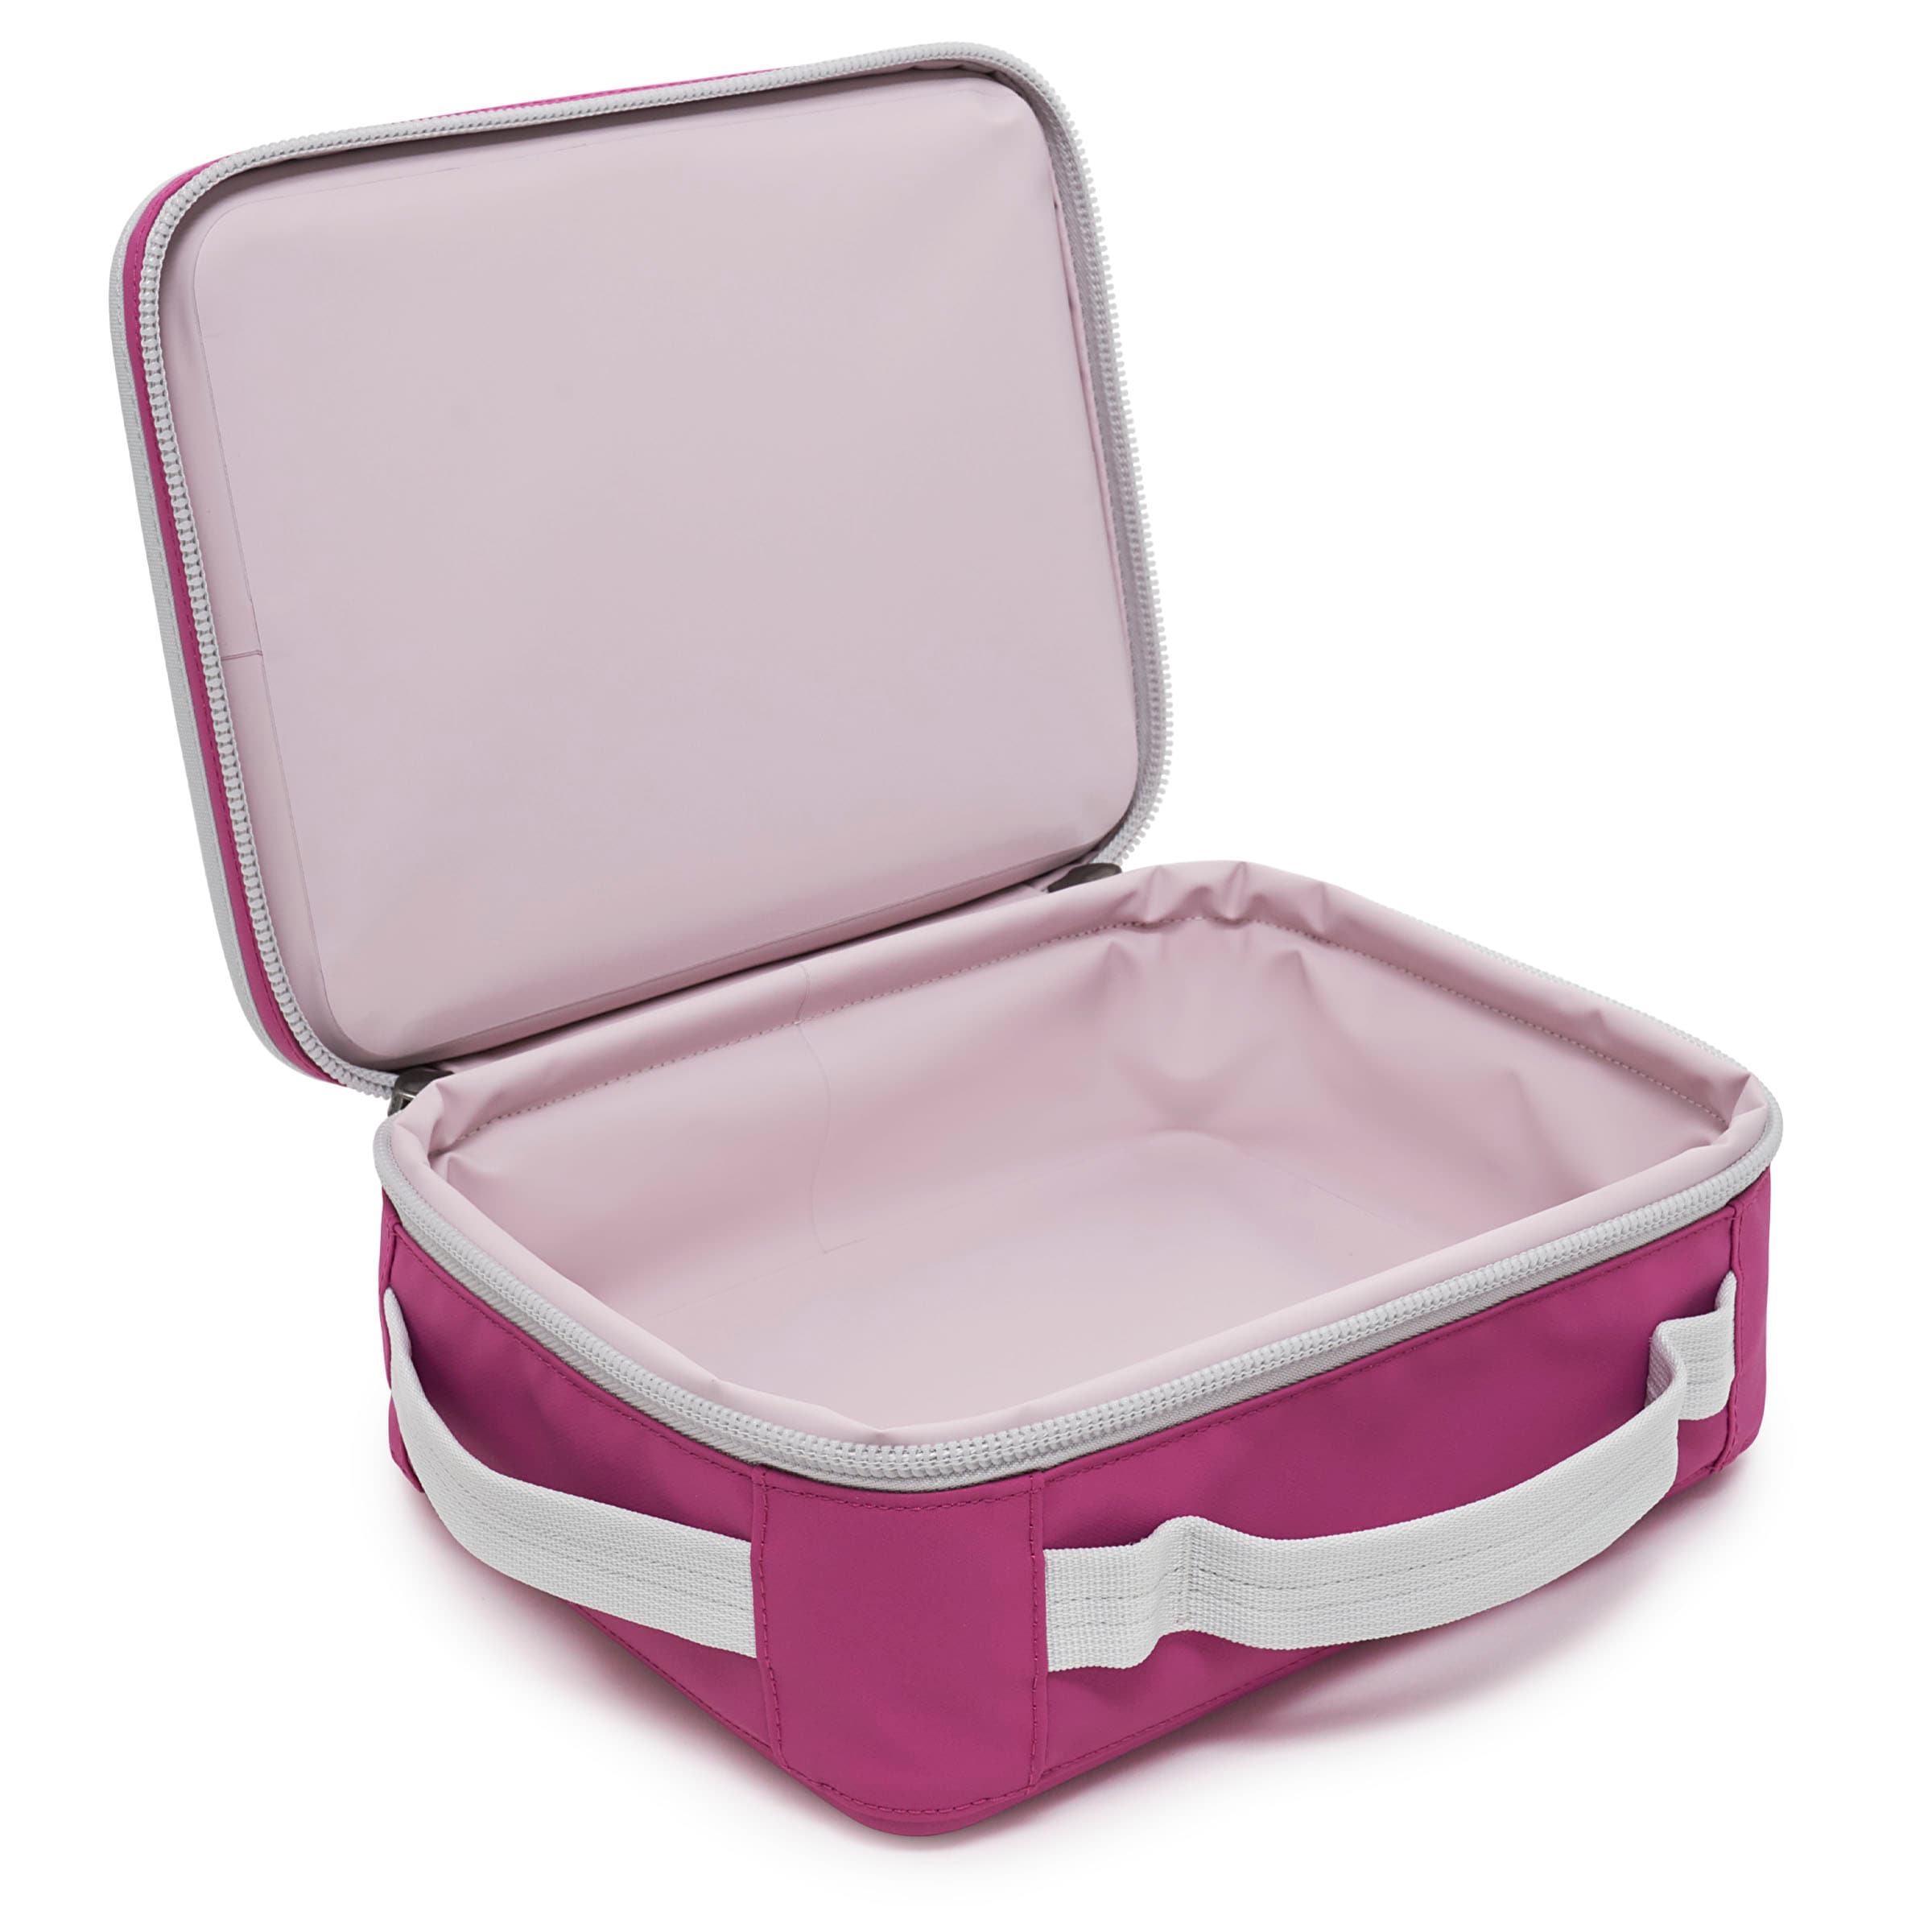 YETI Daytrip Lunch Box - Ice Pink (18060130044) for sale online